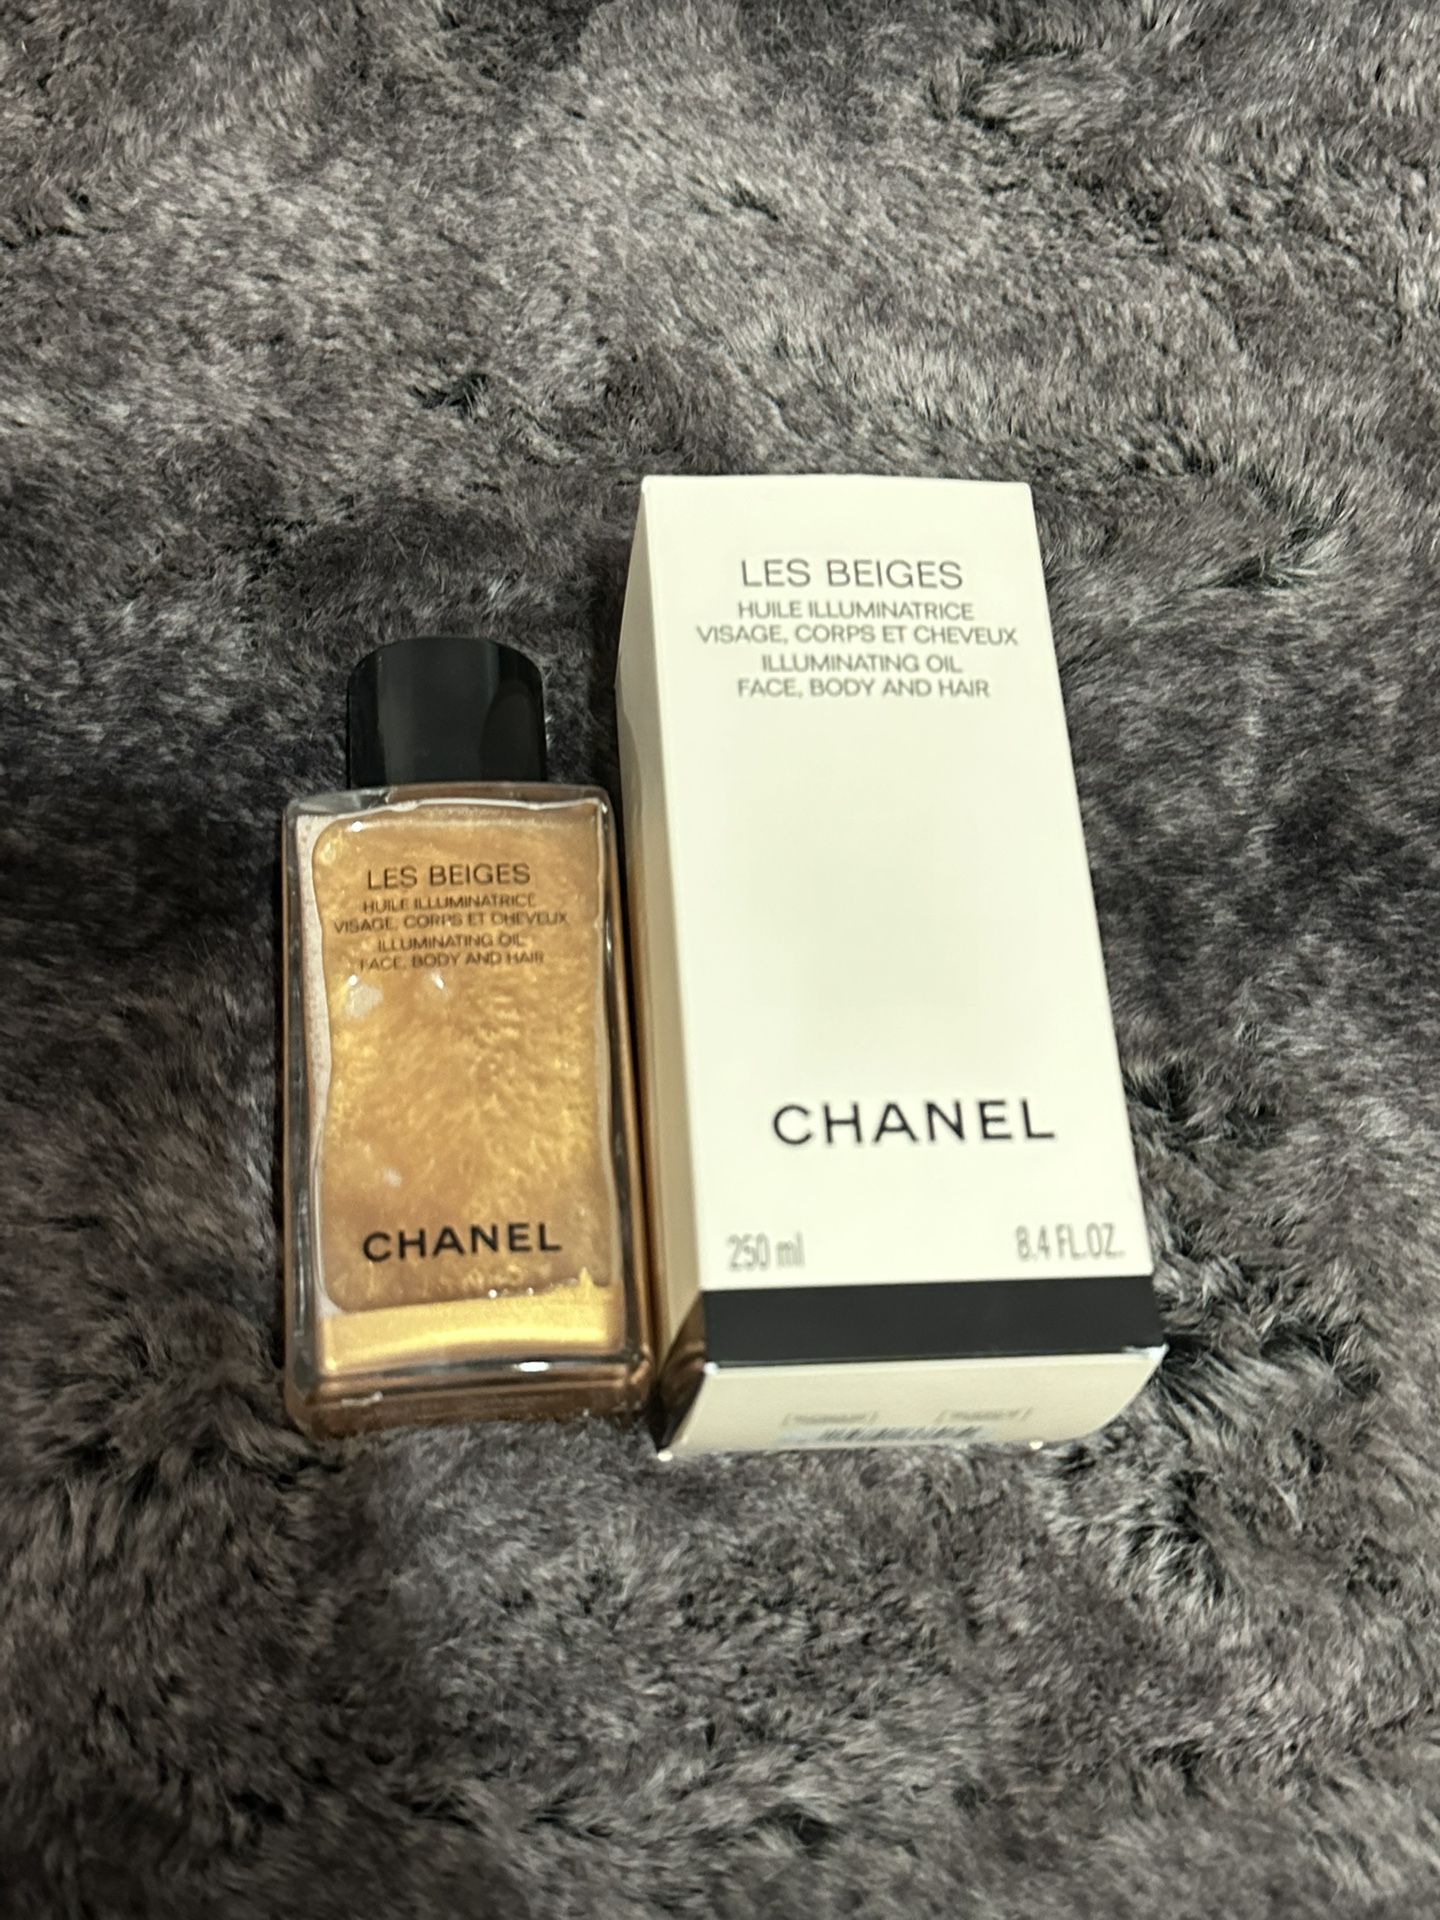 Chanel Leis Beiges for Sale in Miami Beach, FL - OfferUp